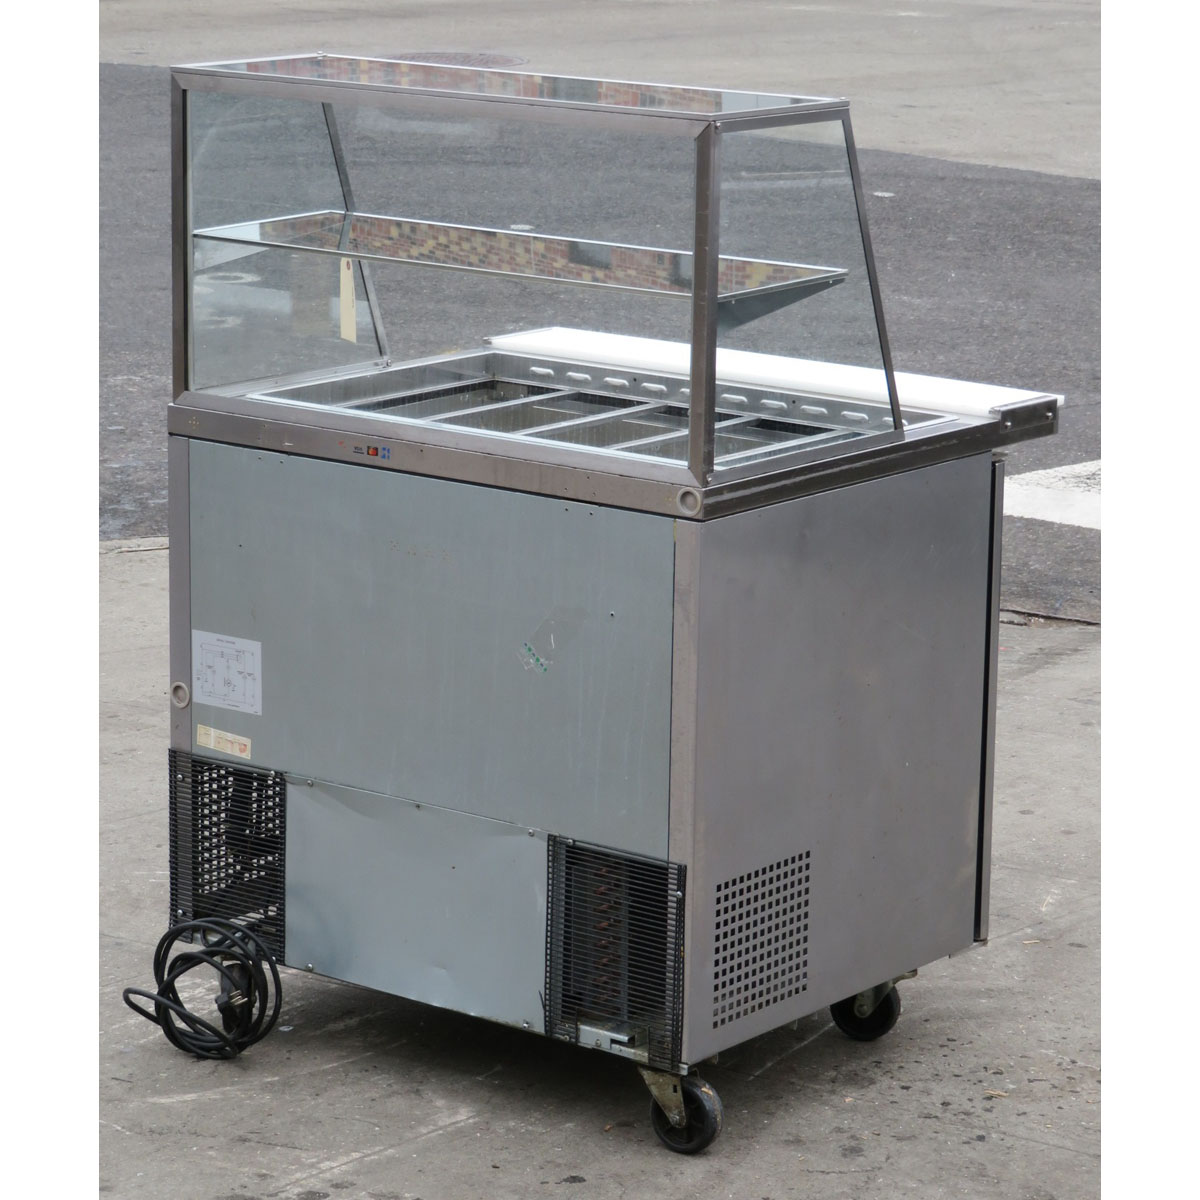 Turbo Air MST-36-15 Refrigerated Sandwich Prep Table 36 Inch, Used Excellent Condition image 2